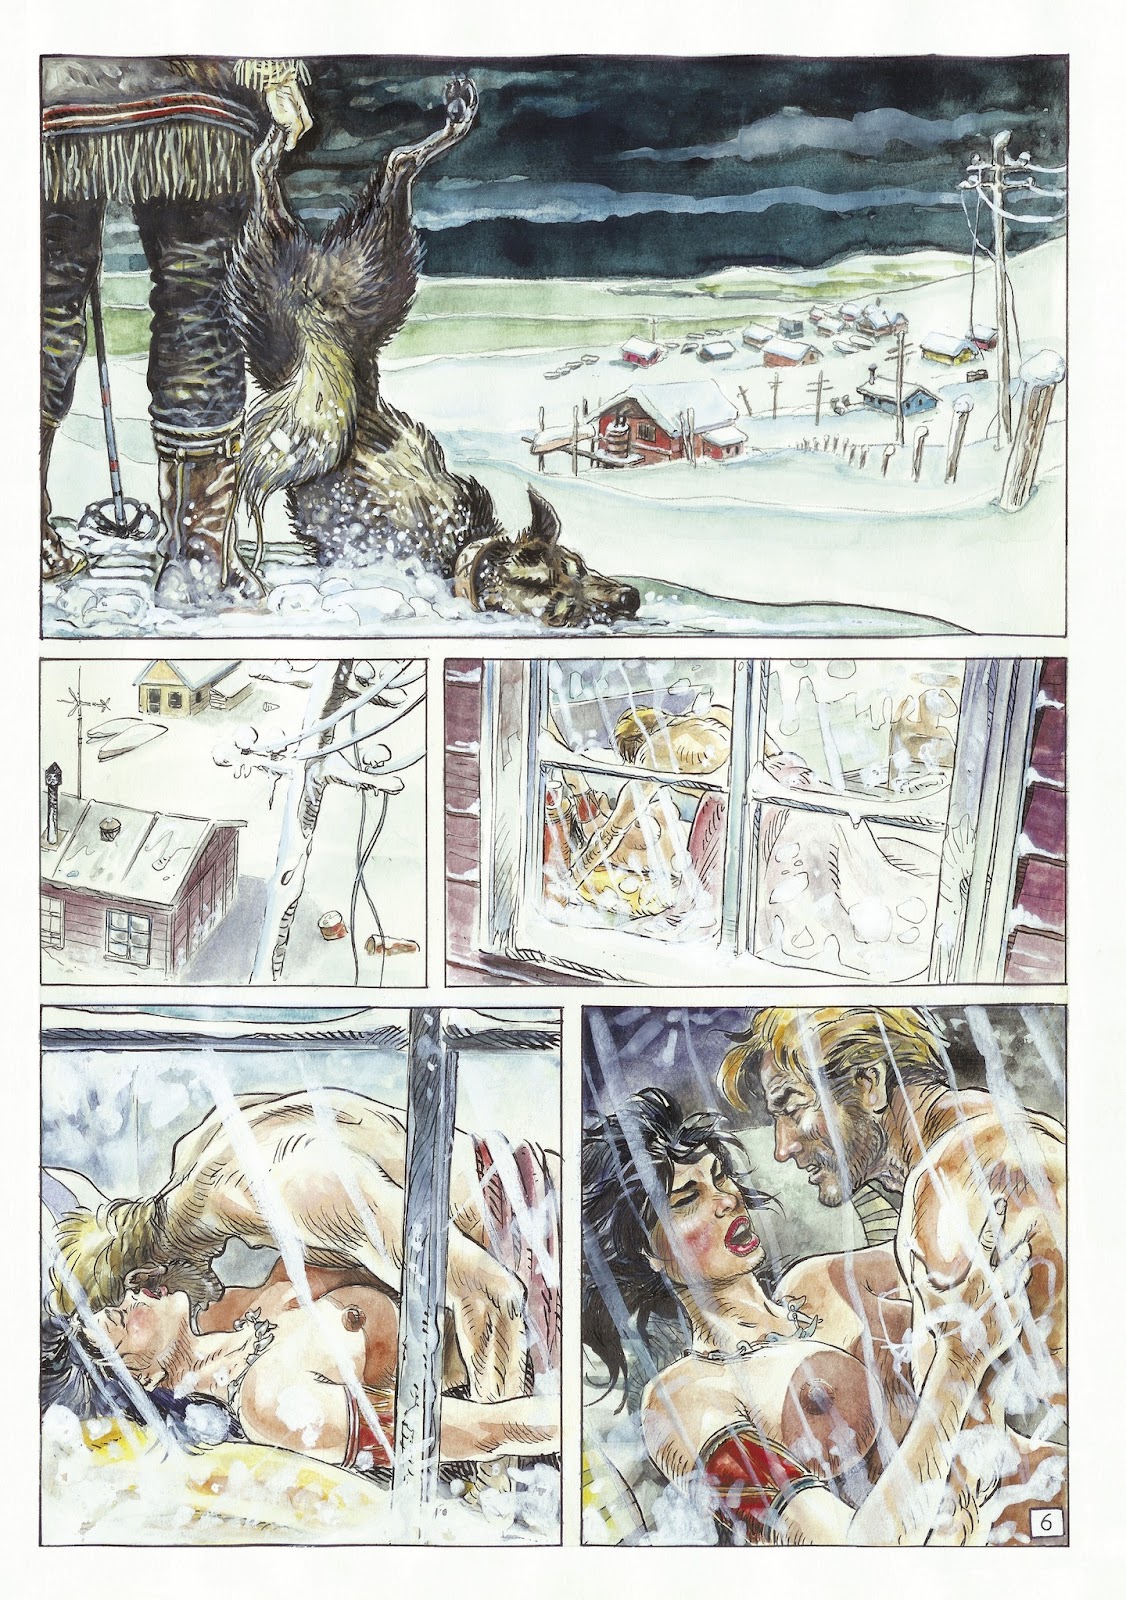 The Man With the Bear issue 1 - Page 8